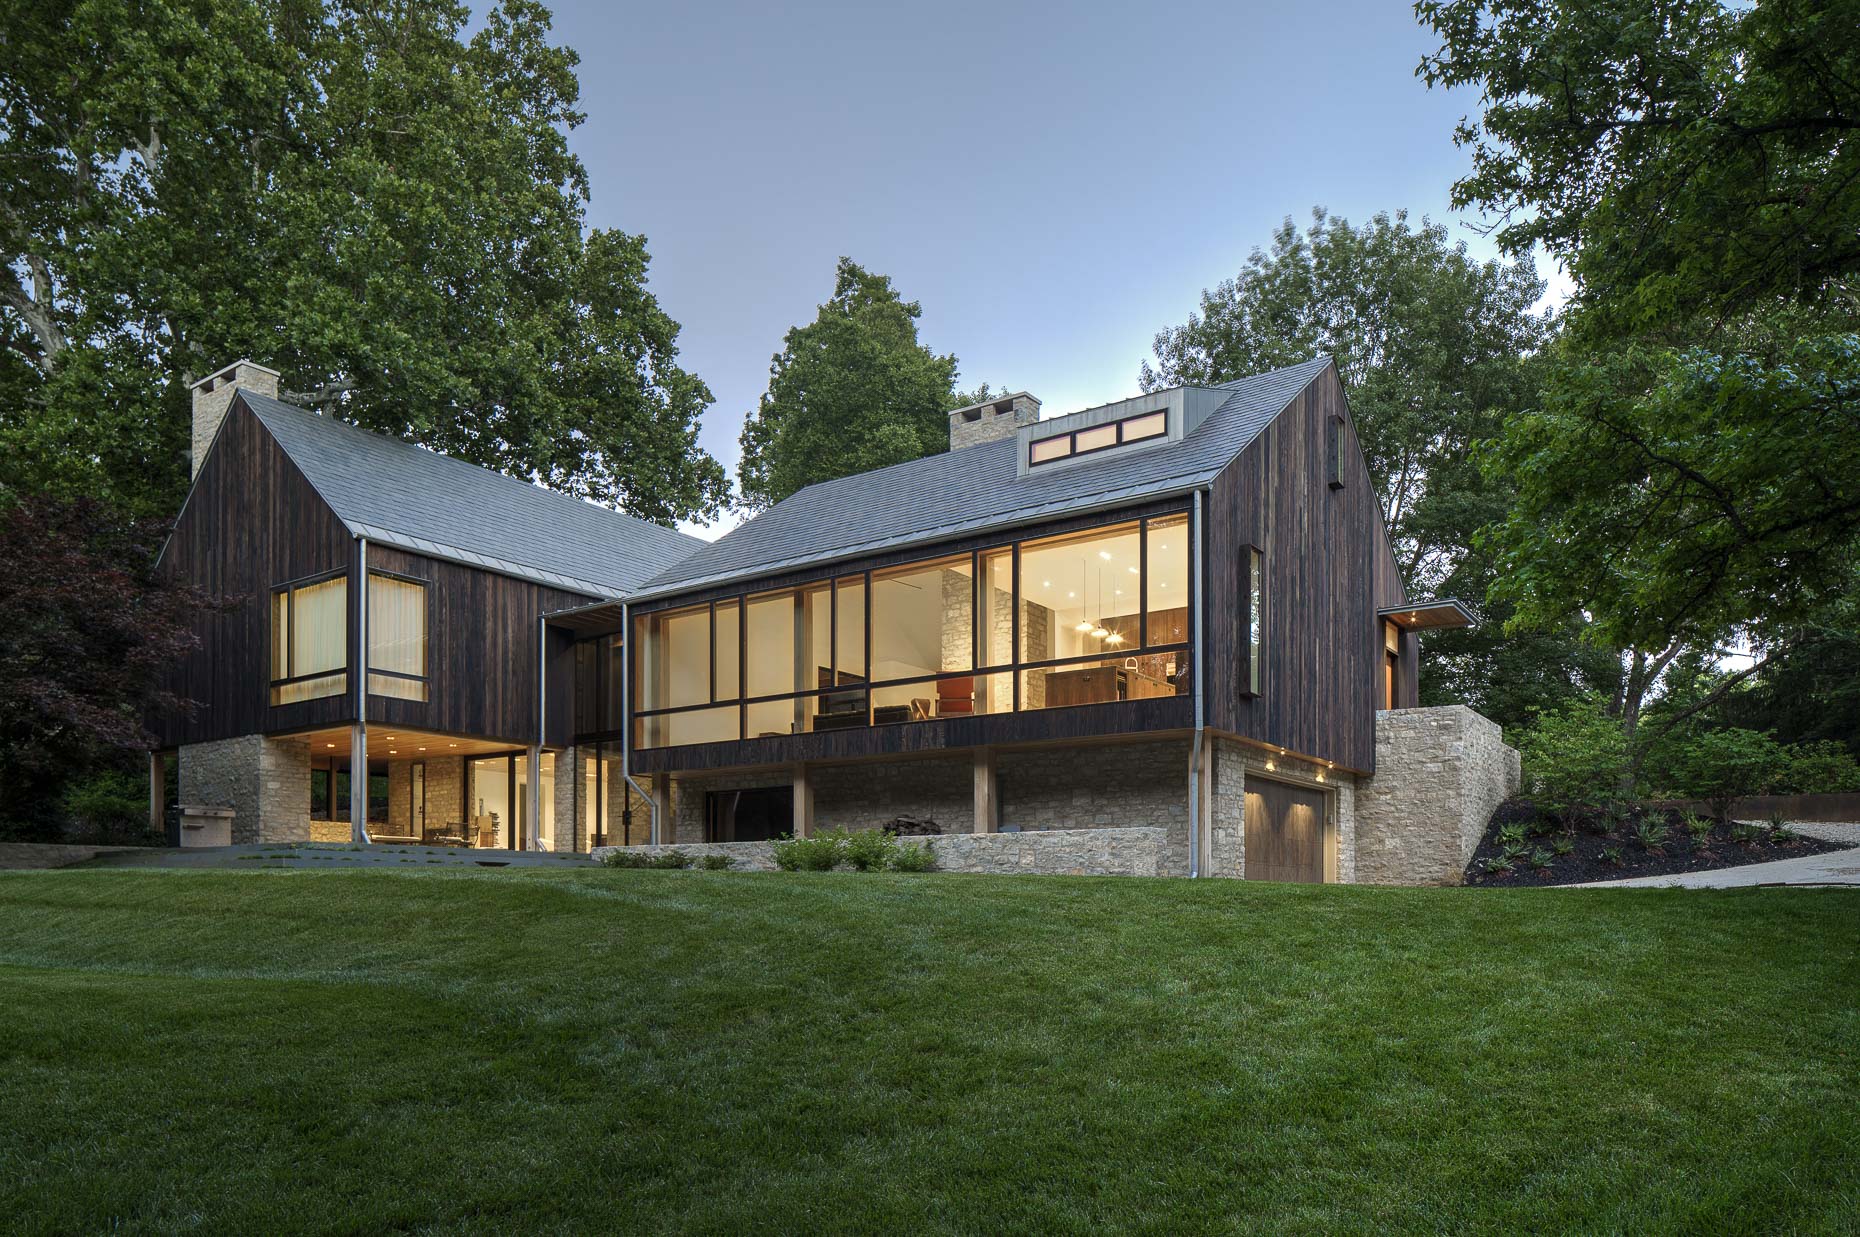 Sullivan Private Residence by JBAD photographed by Brad Feinknopf based in Columbus, Ohio